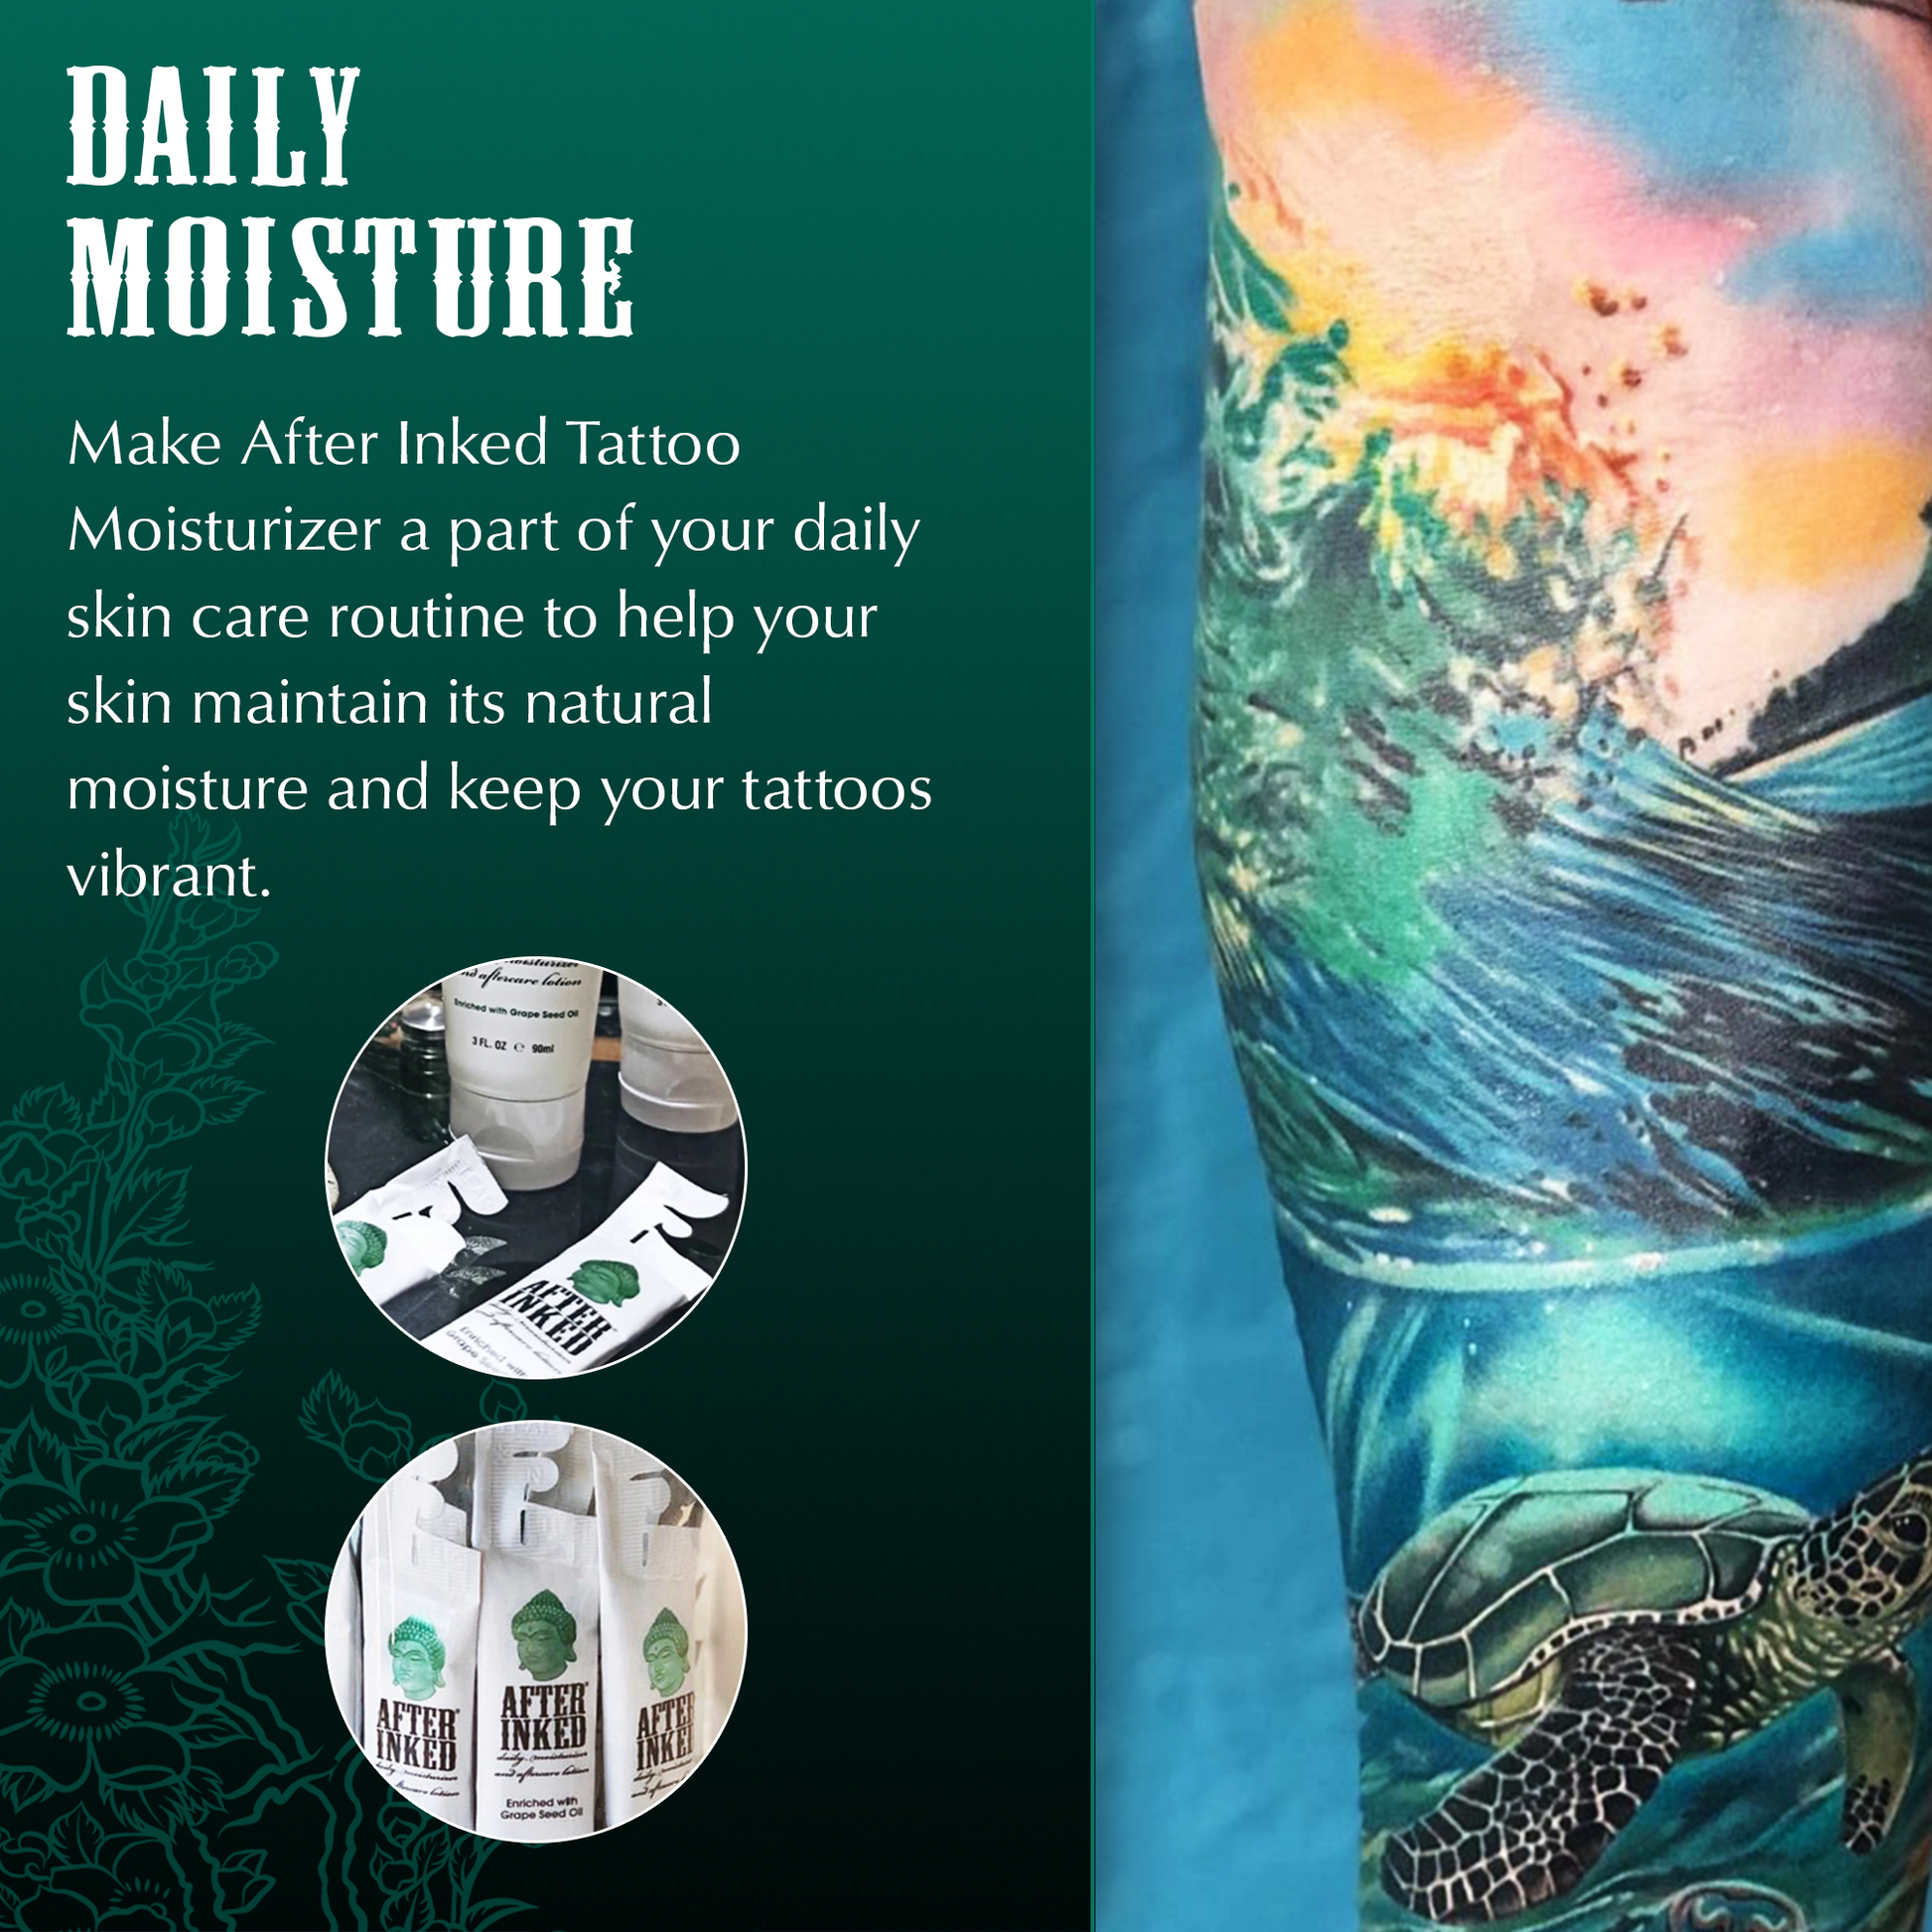 Daily moisture. Make After Inked a part of your daily skin care routine to help your skin maintain its natural moisture and keep your tattoos vibrant.